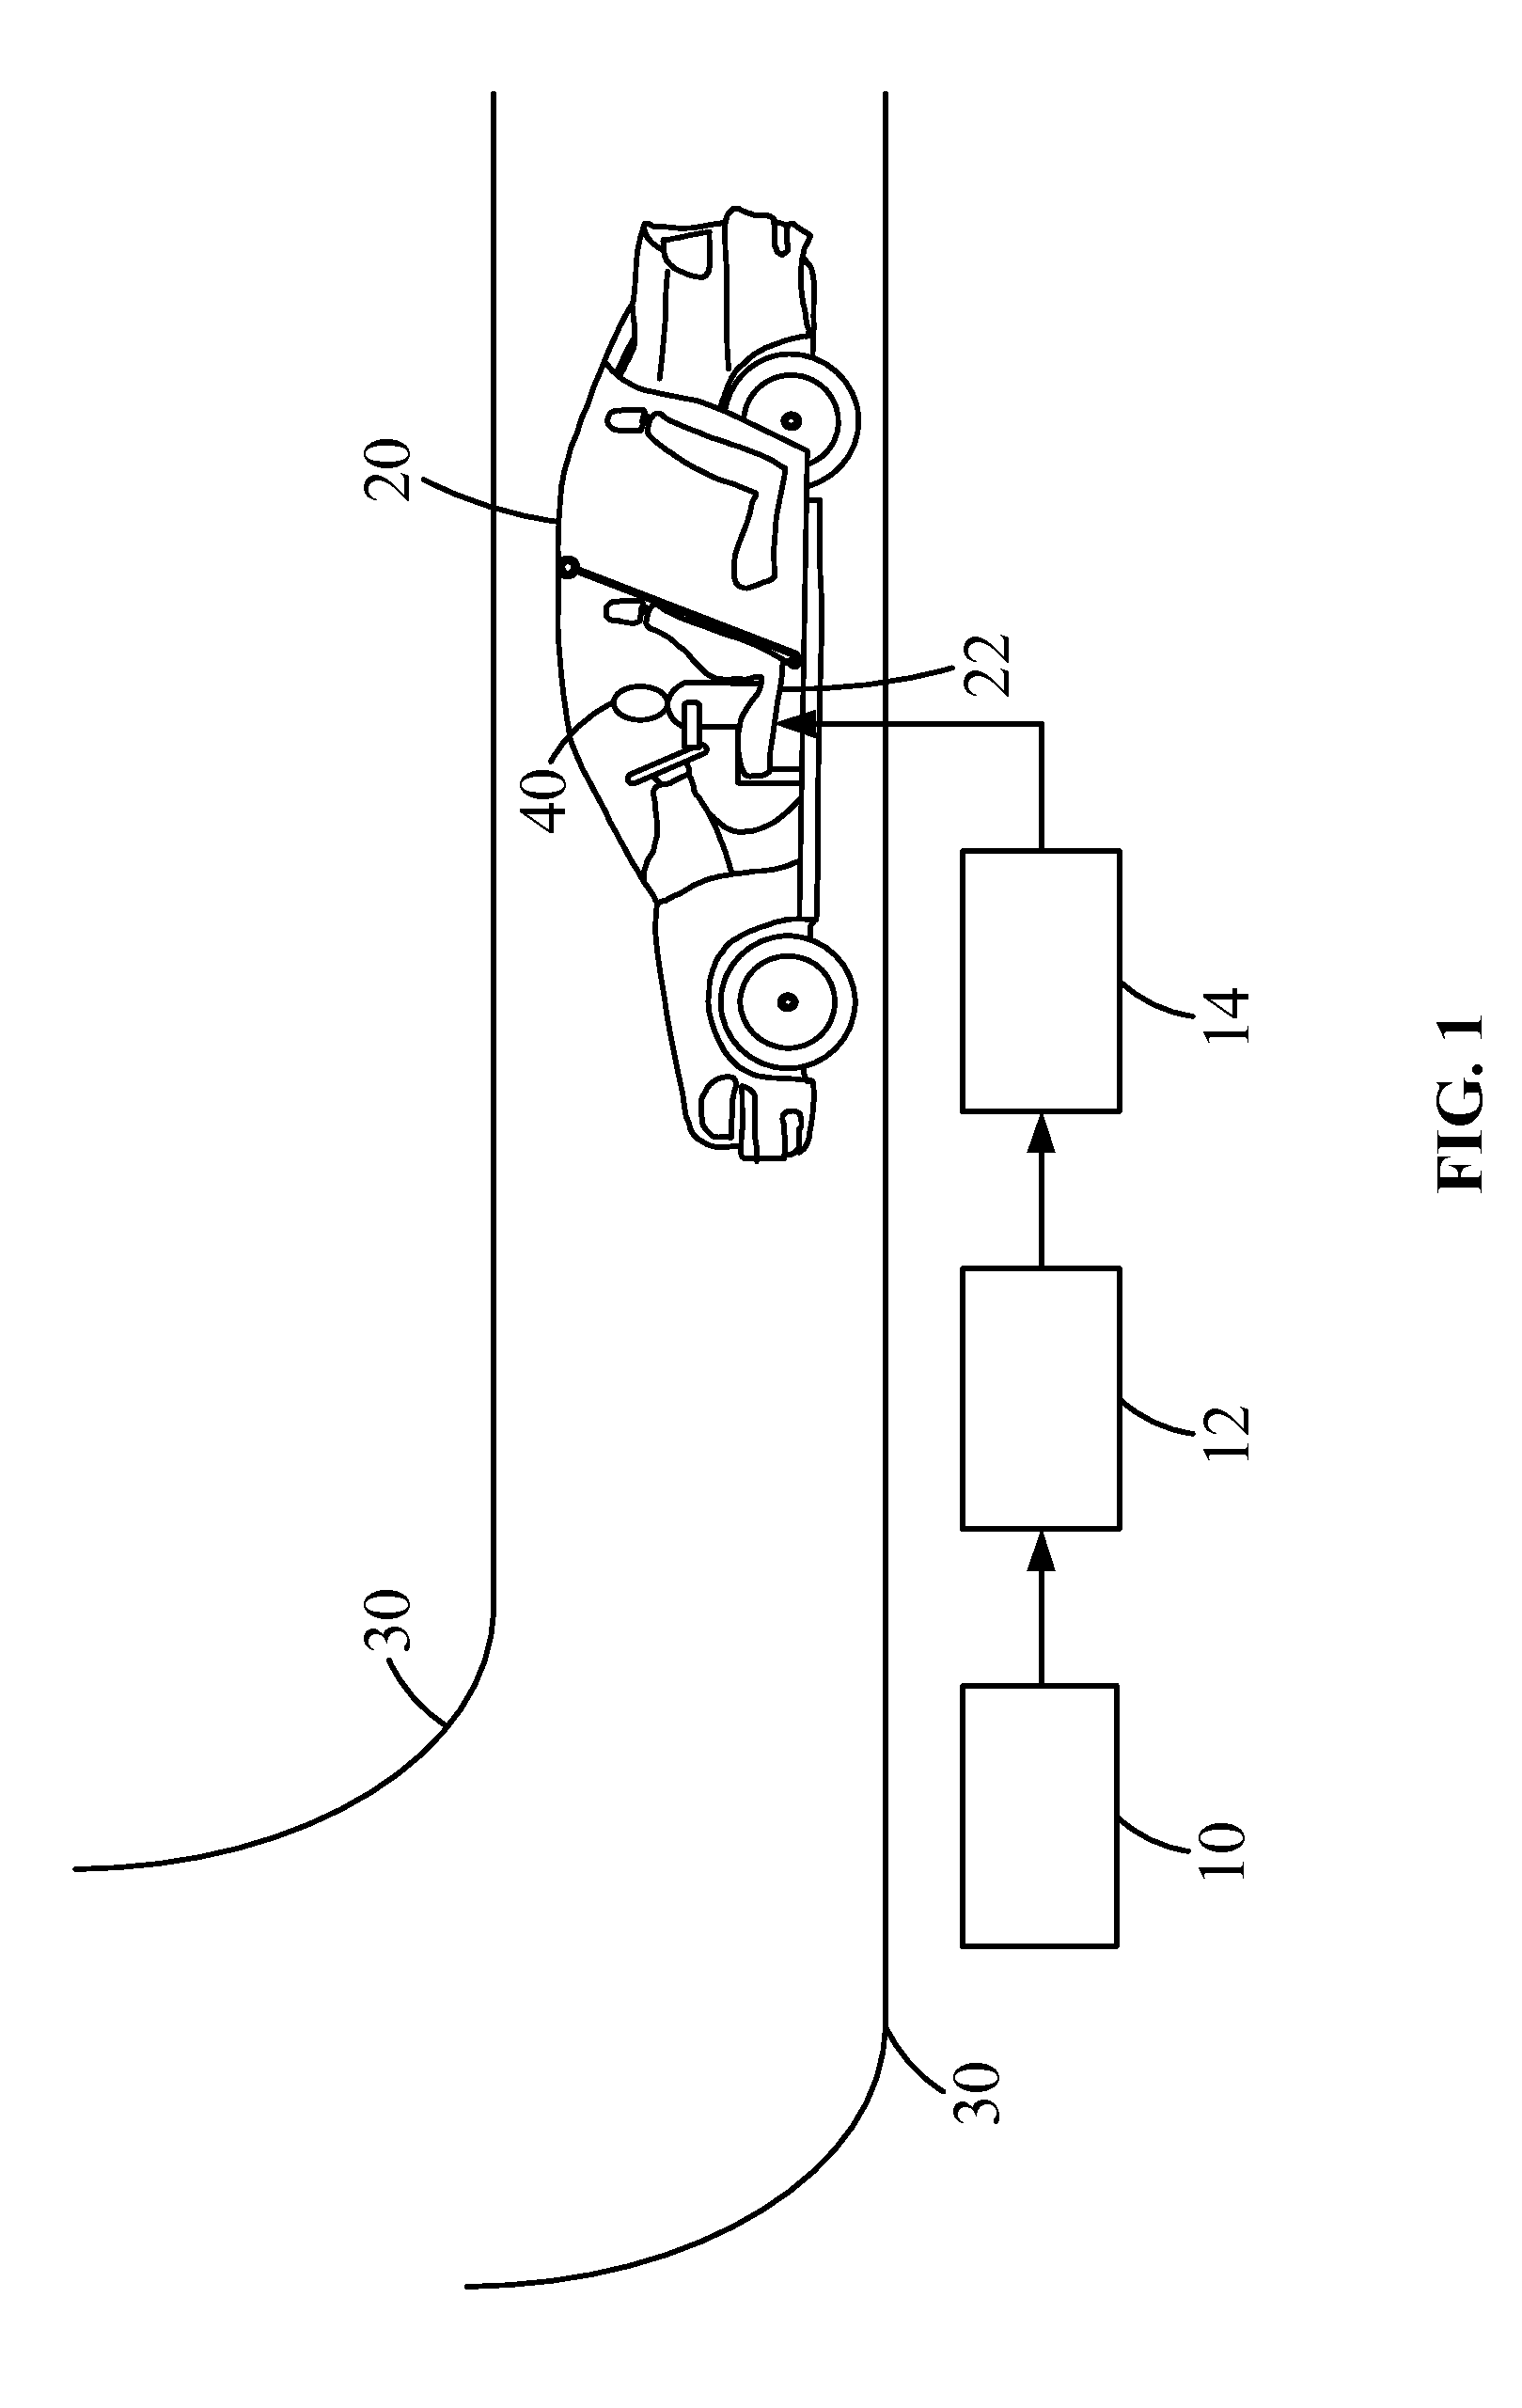 Autonomous seat system of automotive vehicle and performing method thereof